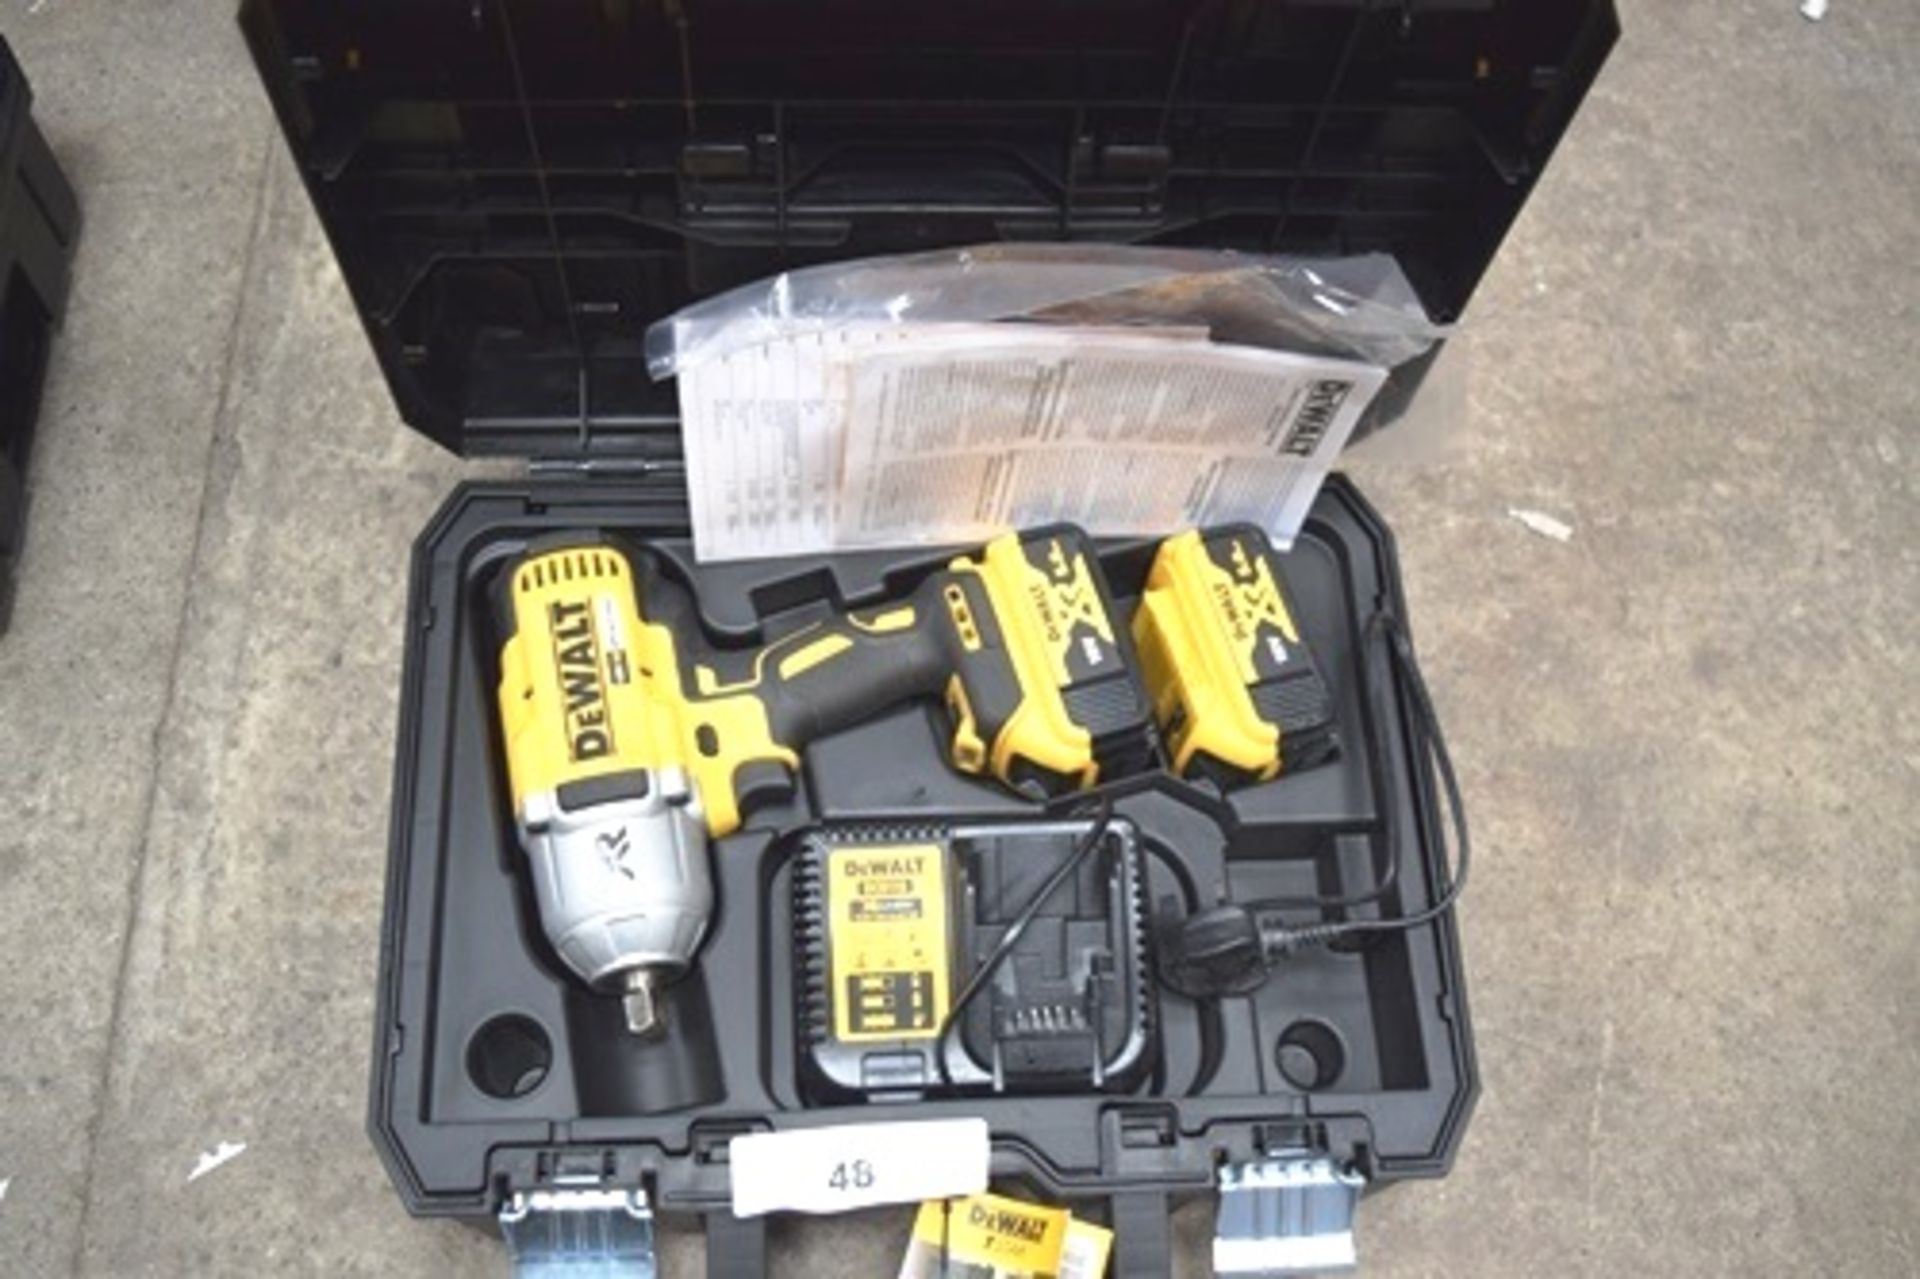 1 x DeWalt 18V high torque brushless impact wrench, model DCF899P2, 1/2" sq drive, with 2 x 18V 5. - Image 2 of 3